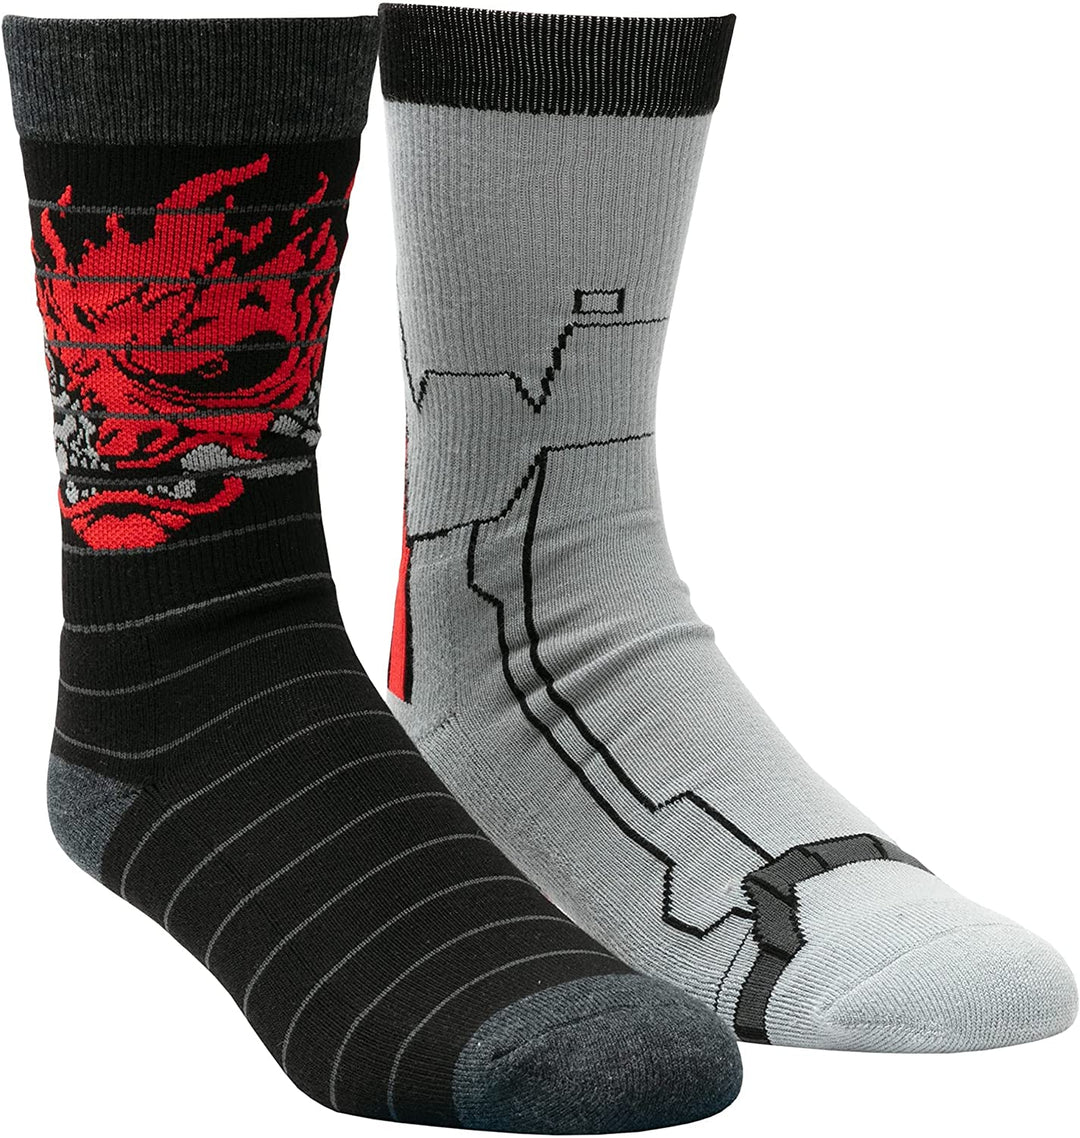 JINX Cyberpunk 2077 Johnny Silverfoot Embroidered Athletic Crew Socks, Multi-Col